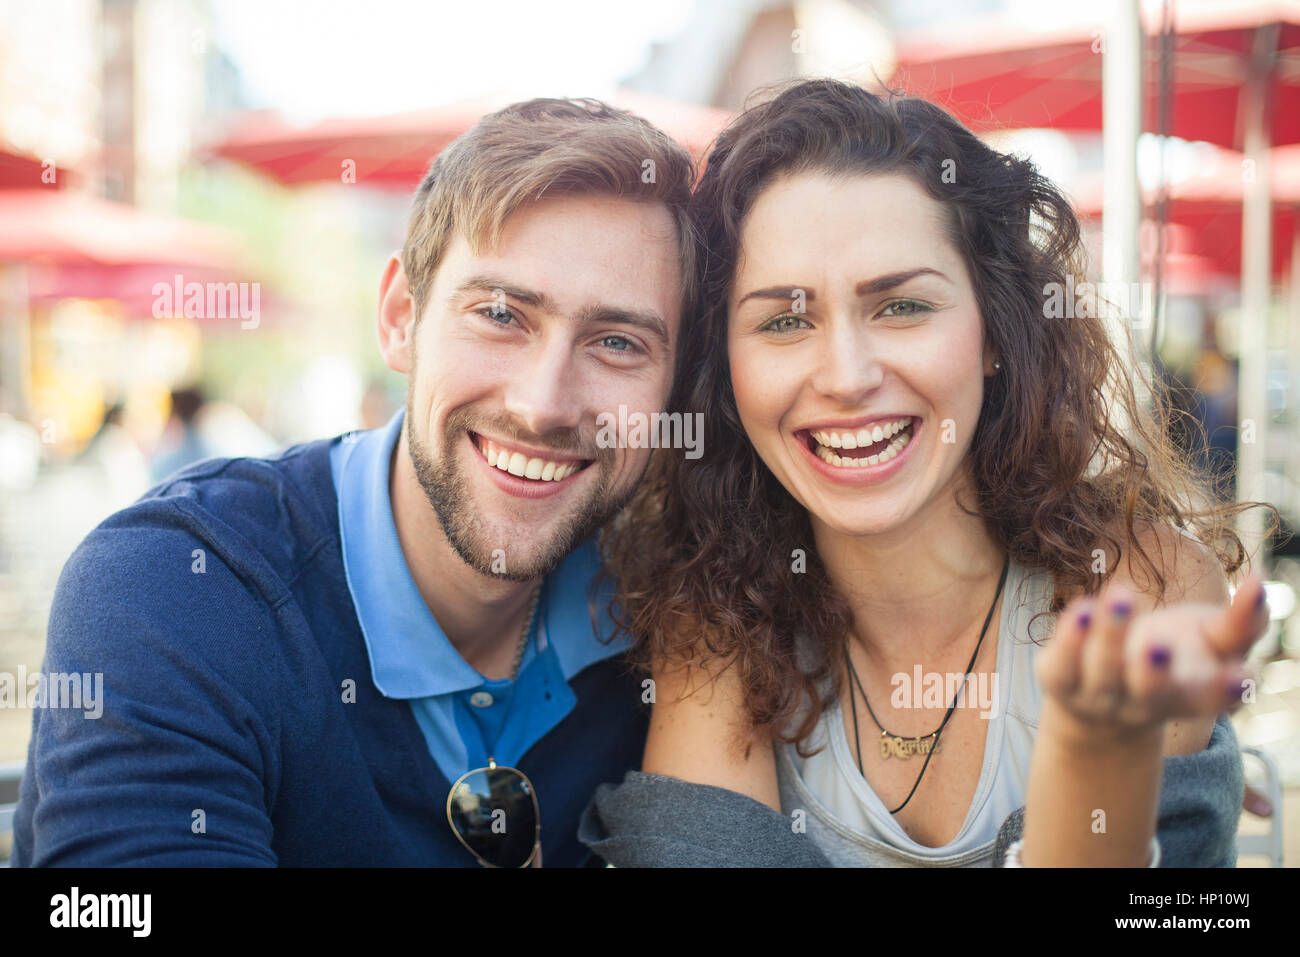 Young couple laughing together outdoors, portrait Stock Photo